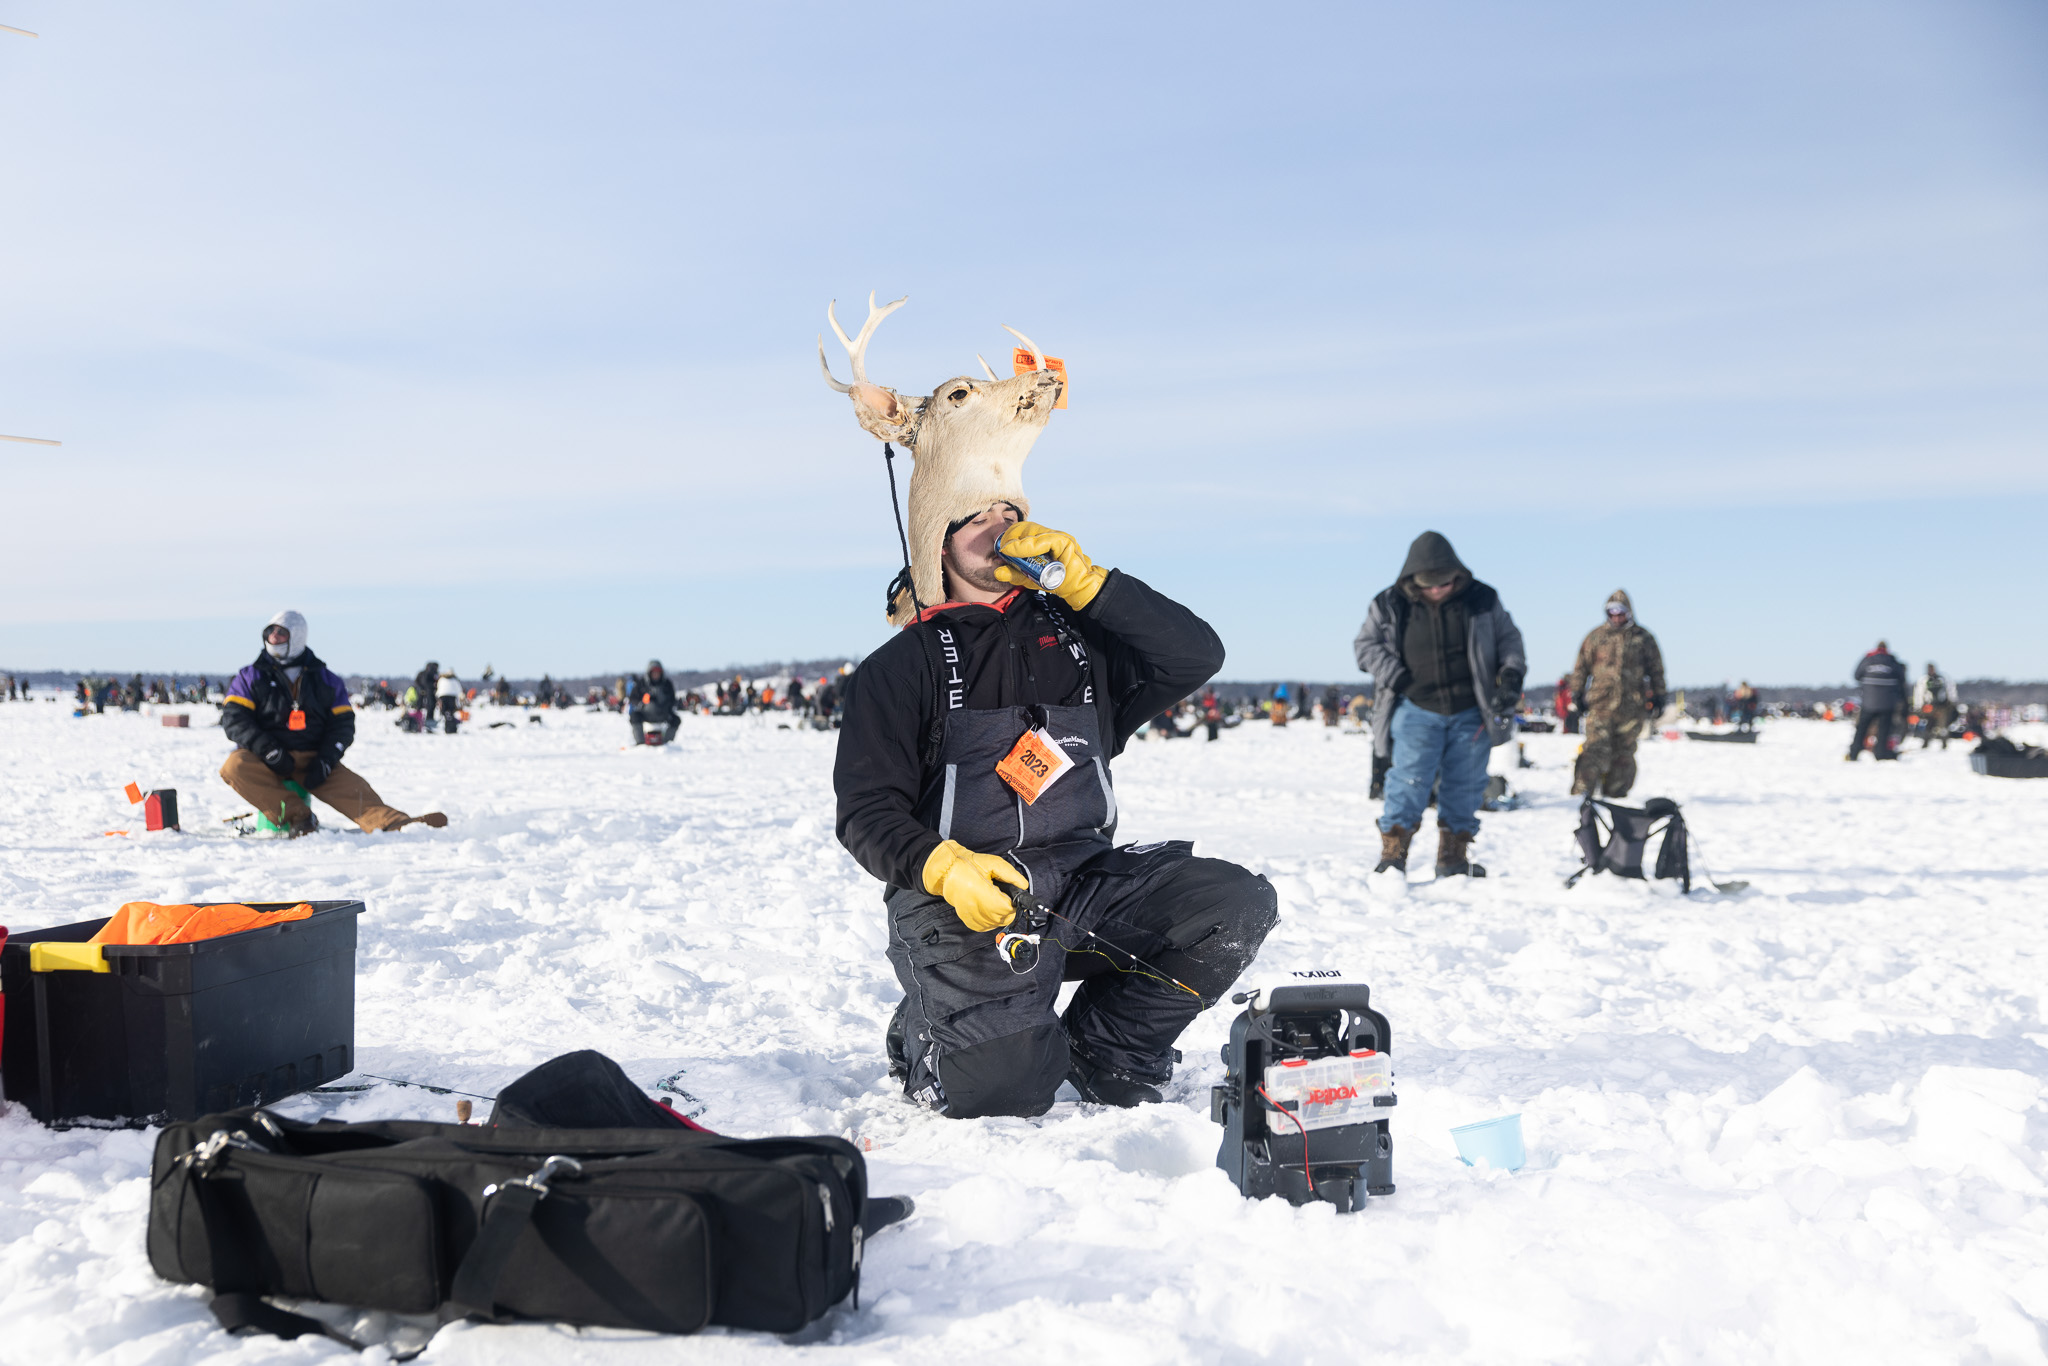 Hot Dogs, Schnapps, and Live Minnow Shots: Grub From the World's Biggest Ice Fishing Tournament